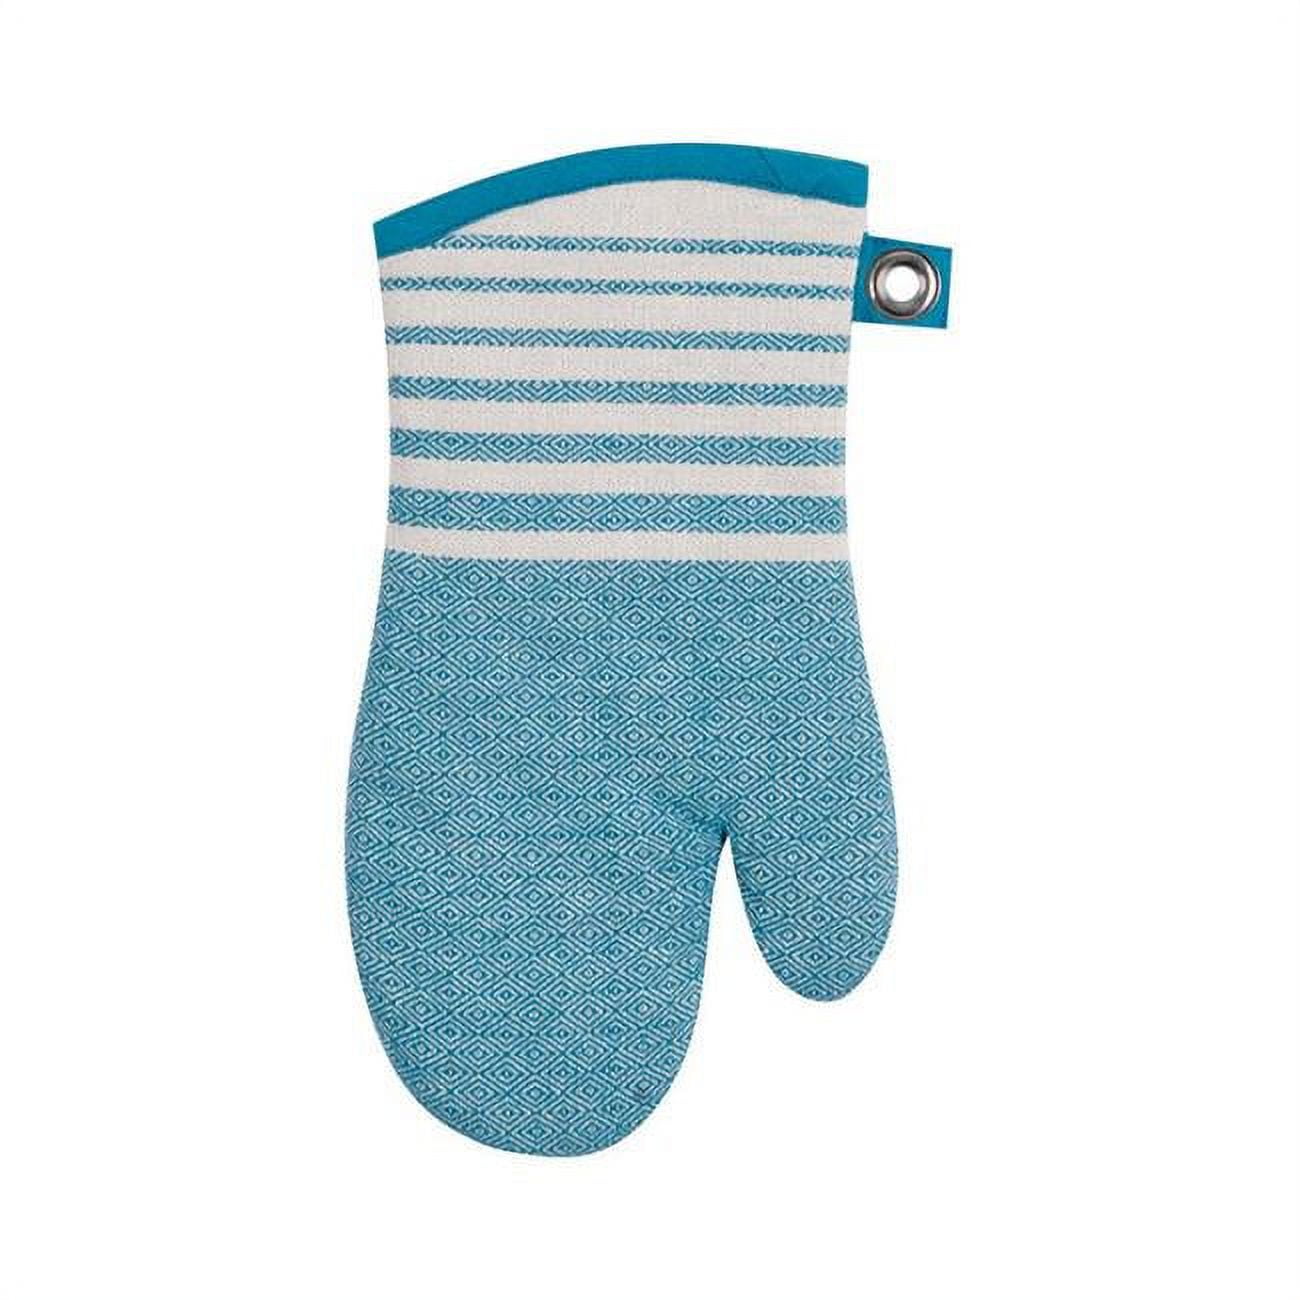 6661920 Teal Cotton Oven Mitt - Pack Of 3